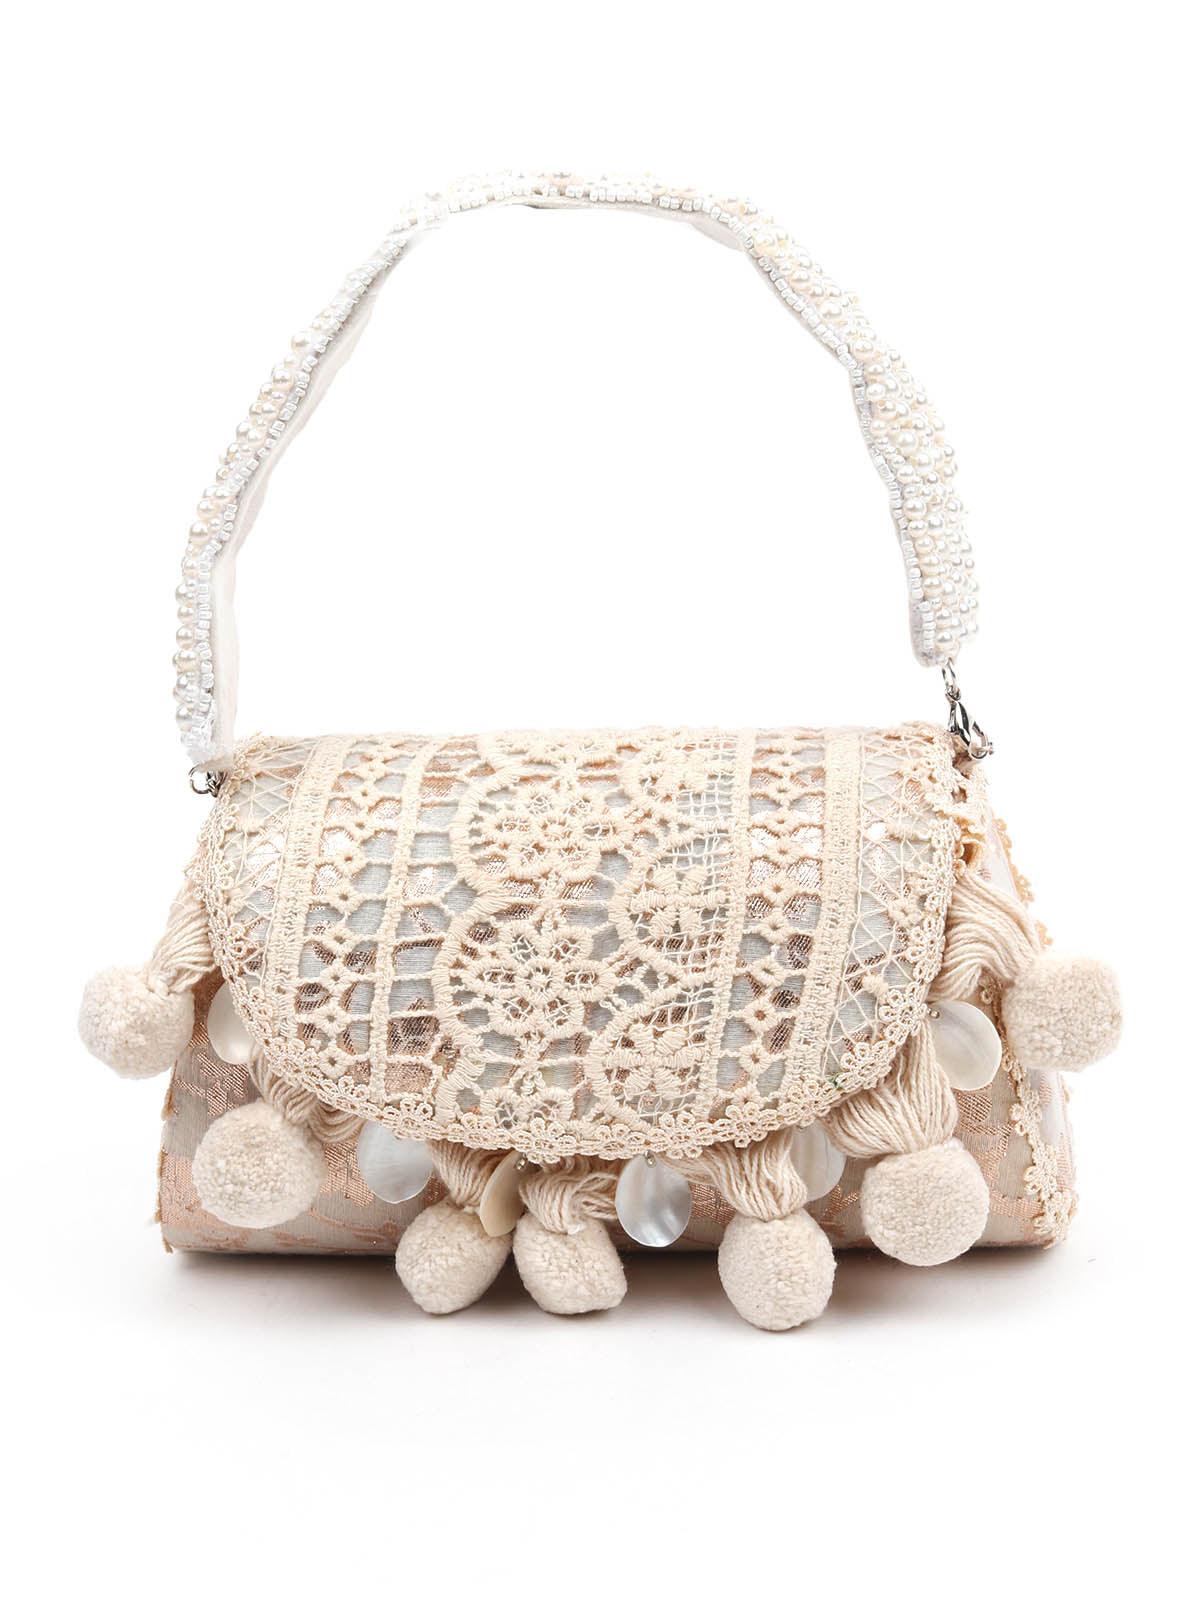 AWE-INSPIRING WHITE AND GOLD CLUTCH BAG - Odette